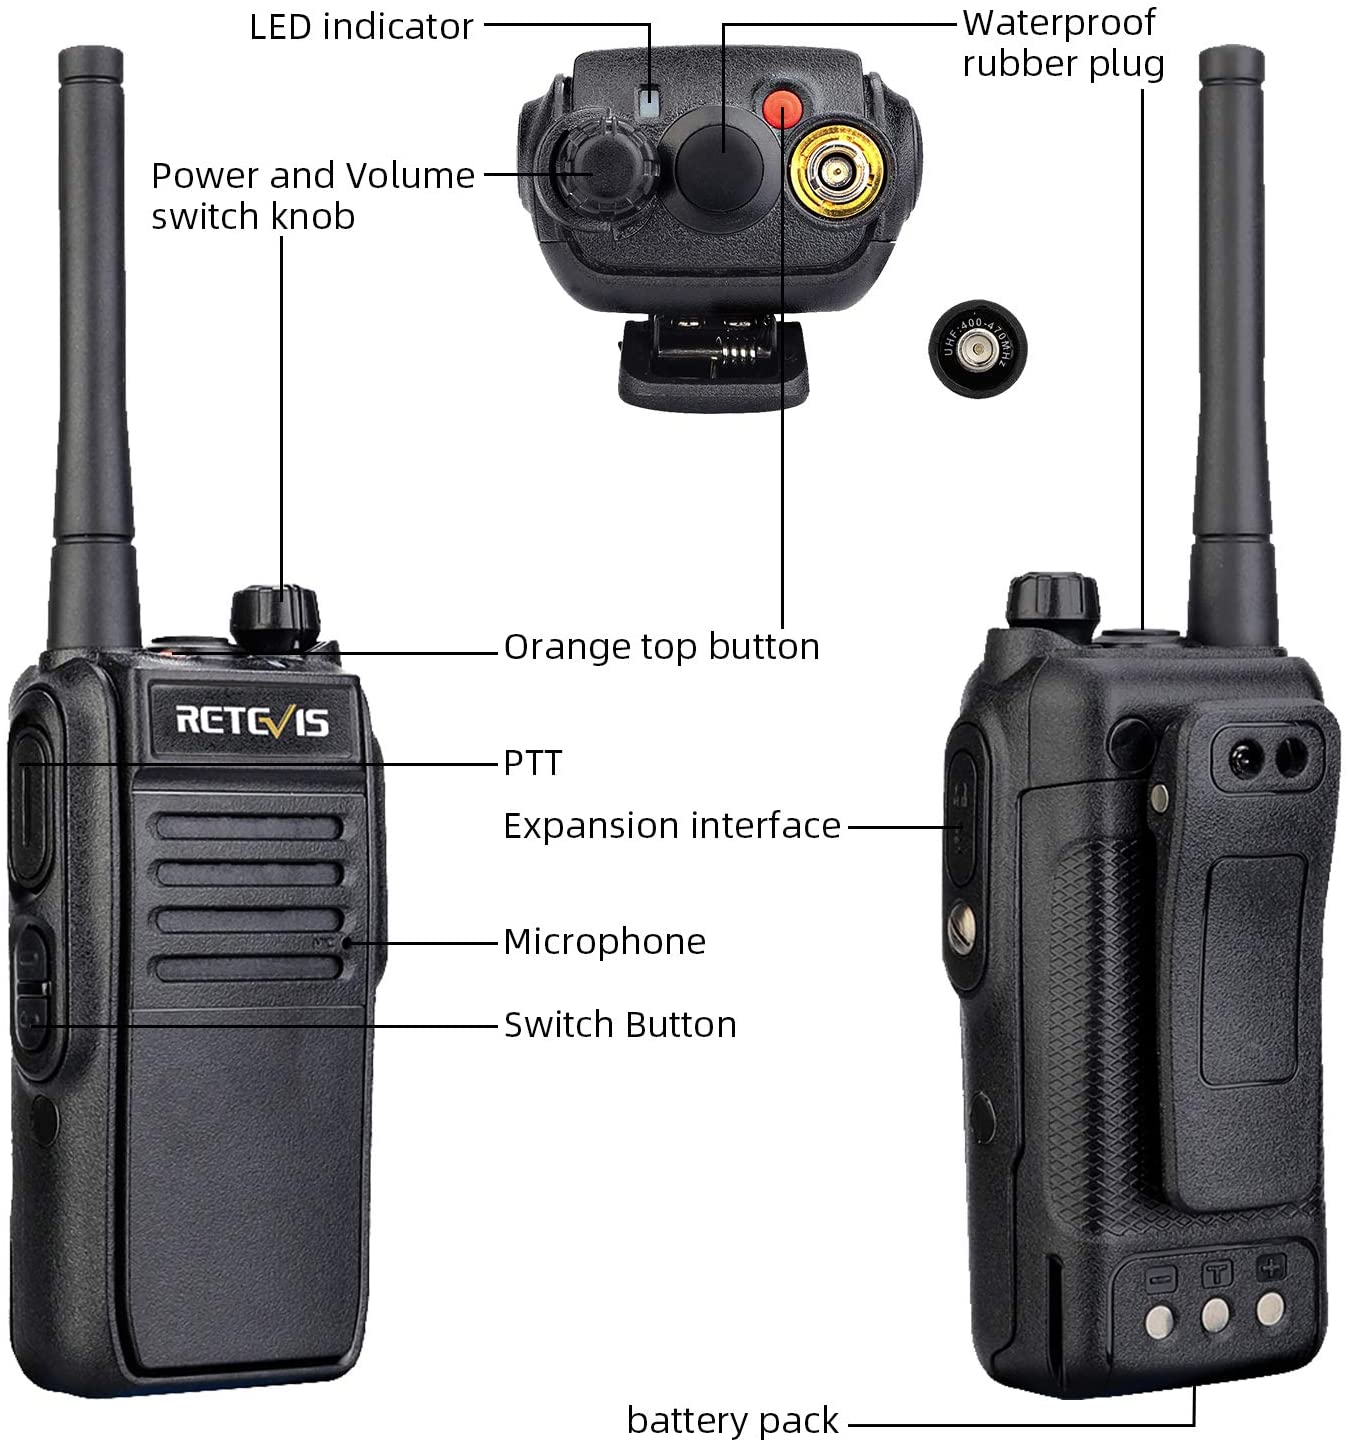 How to set up the Retevis RT78 Bluetooth walkie-talkie through the mobile app-laura-2